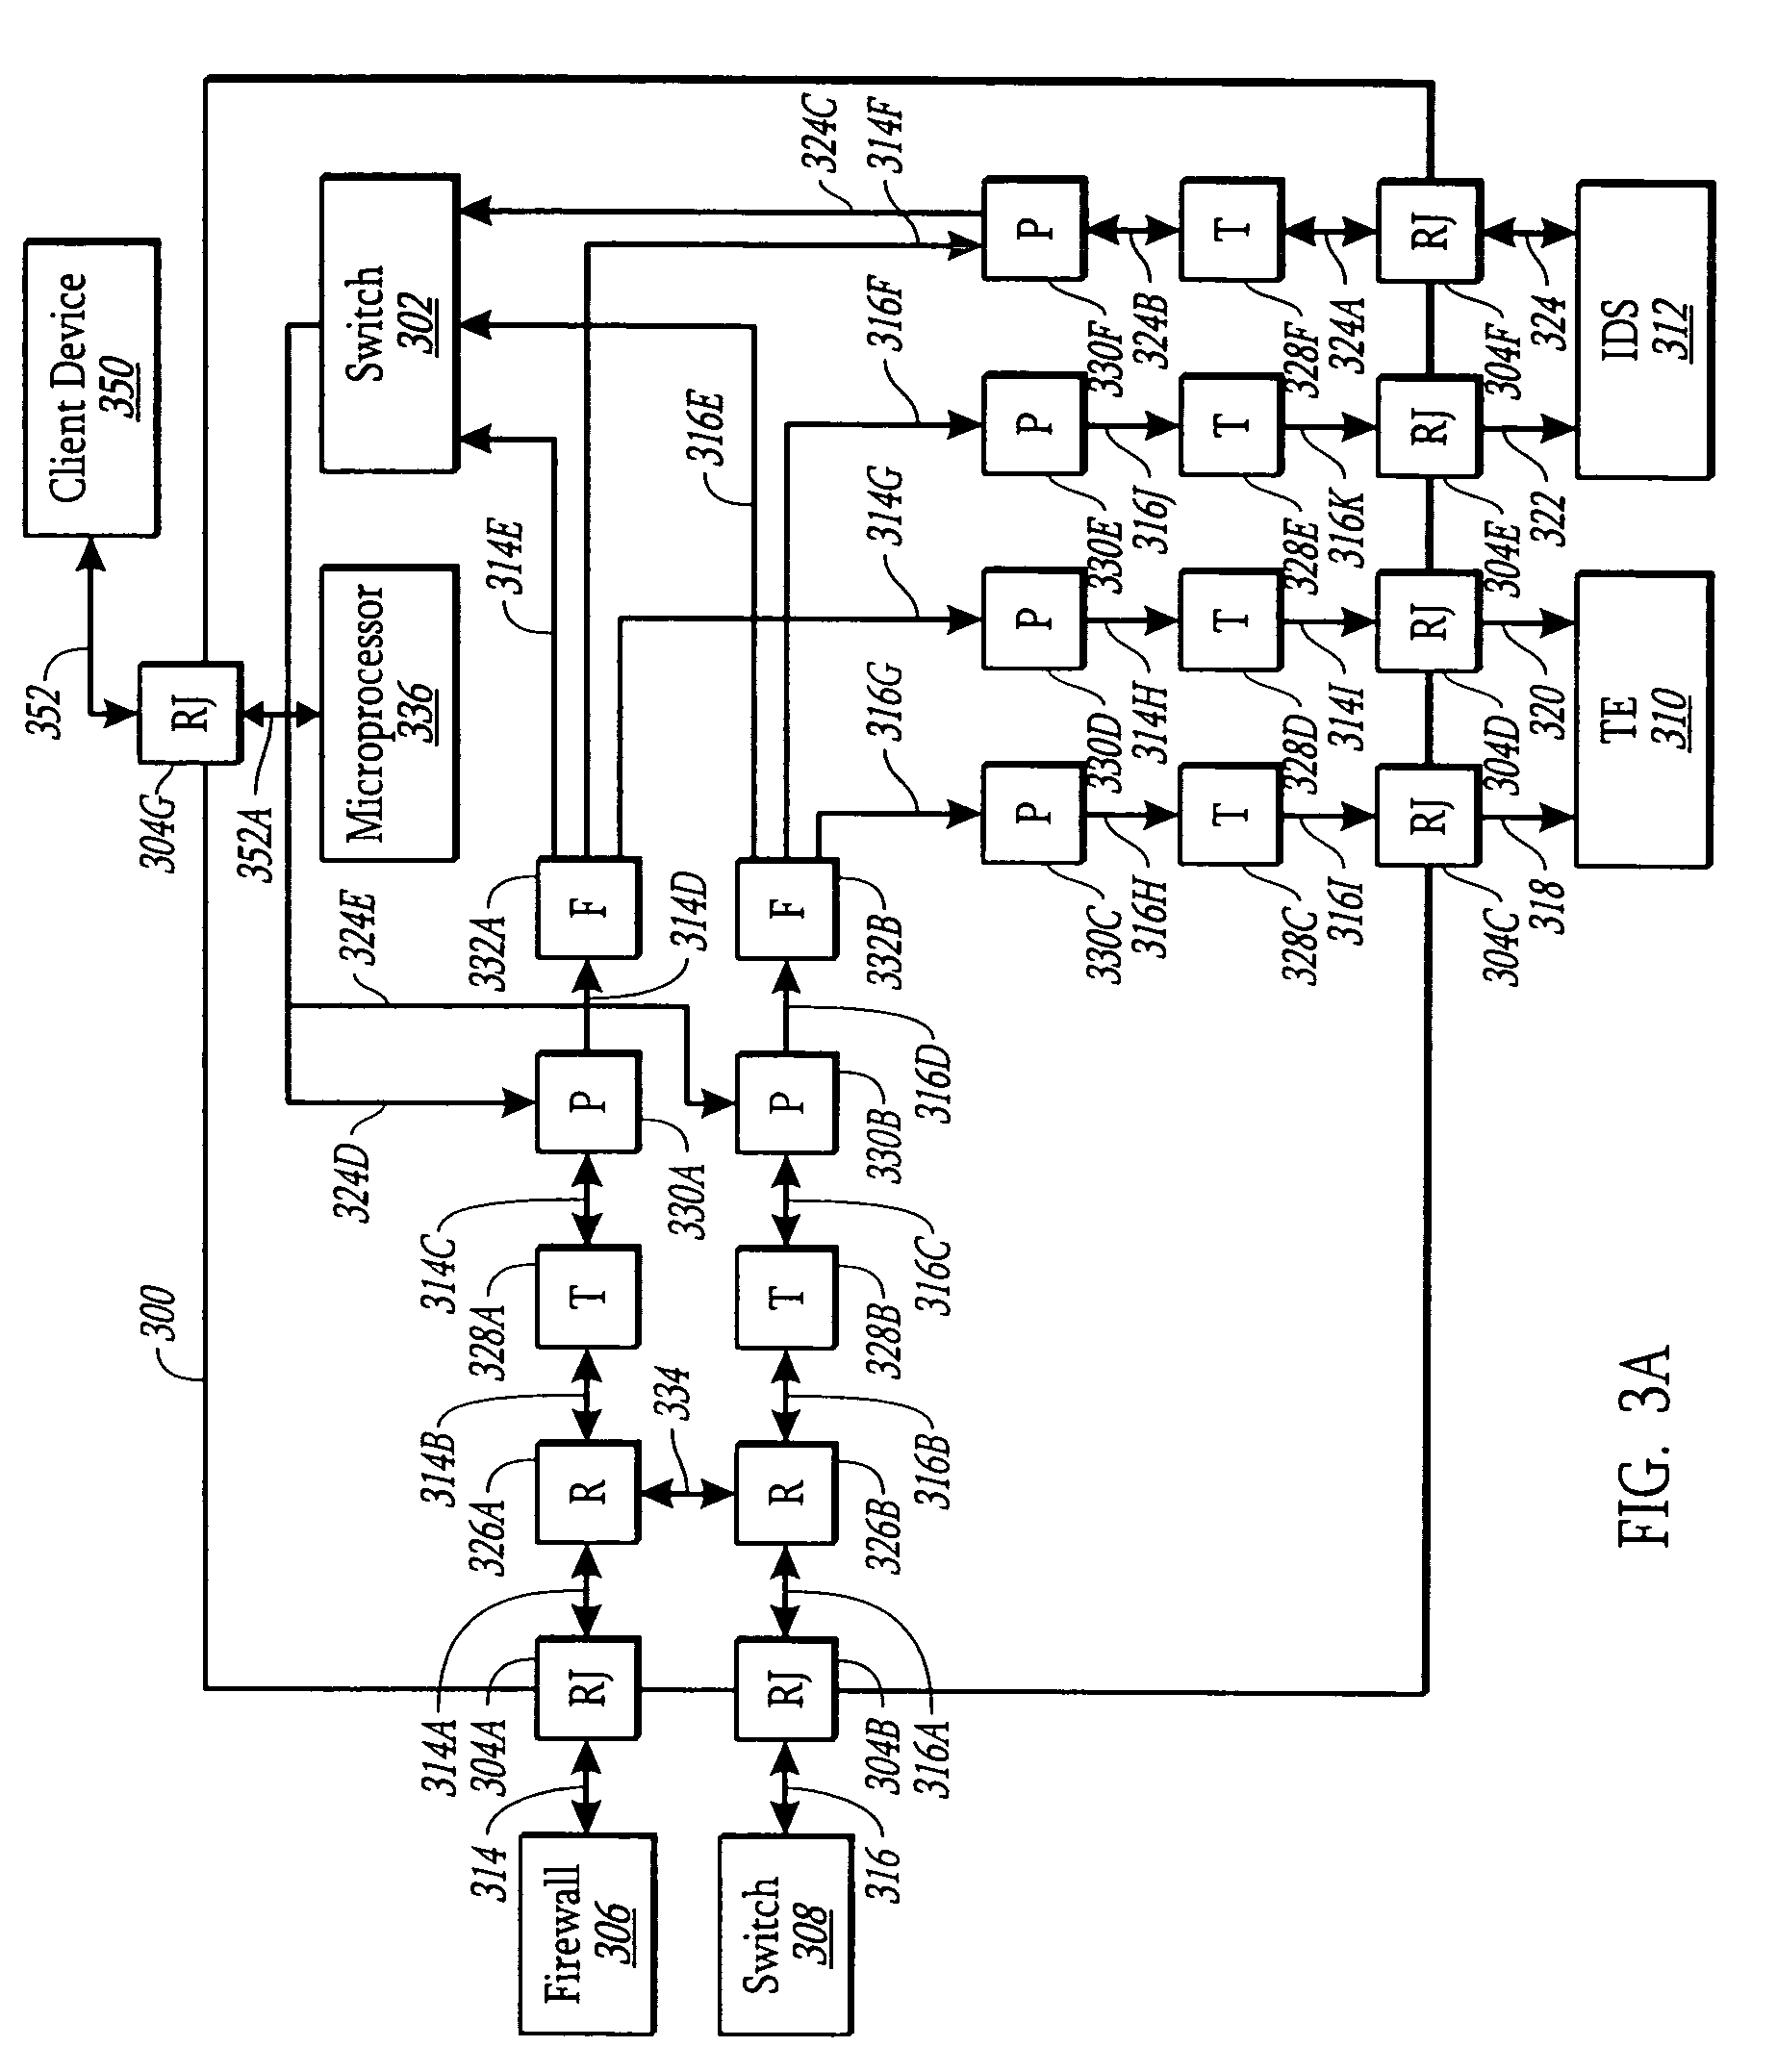 Network tap with integrated circuitry